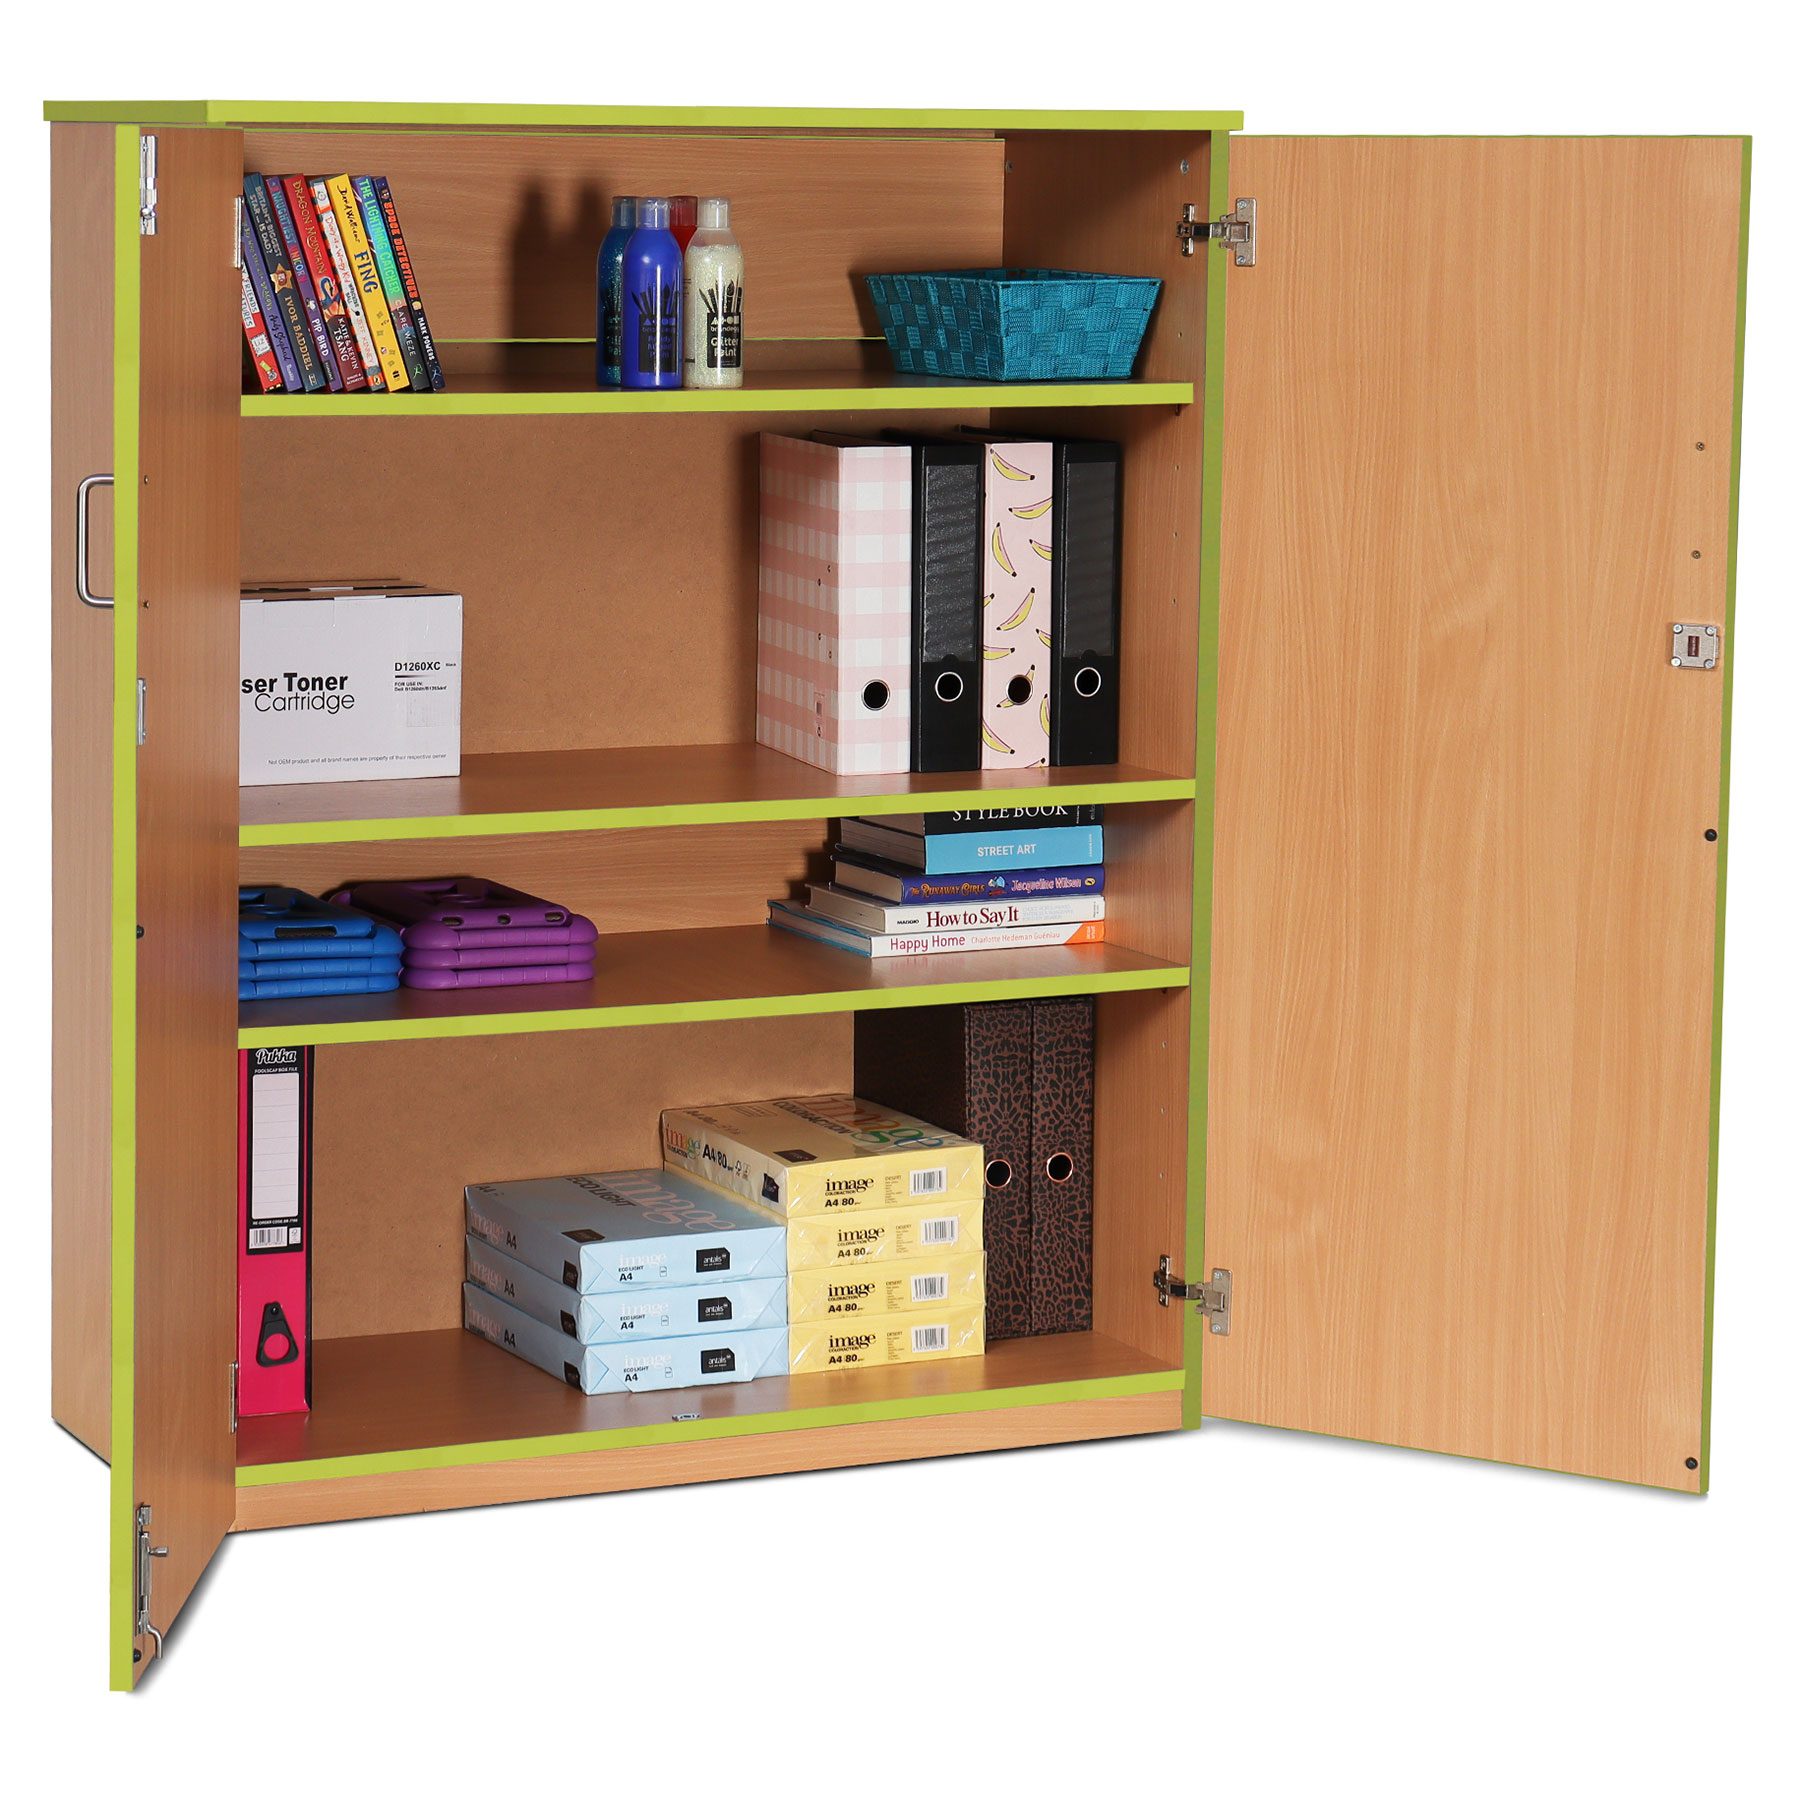 Lockable Cupboard with 3 Shelves & Lime Edging (1250H)